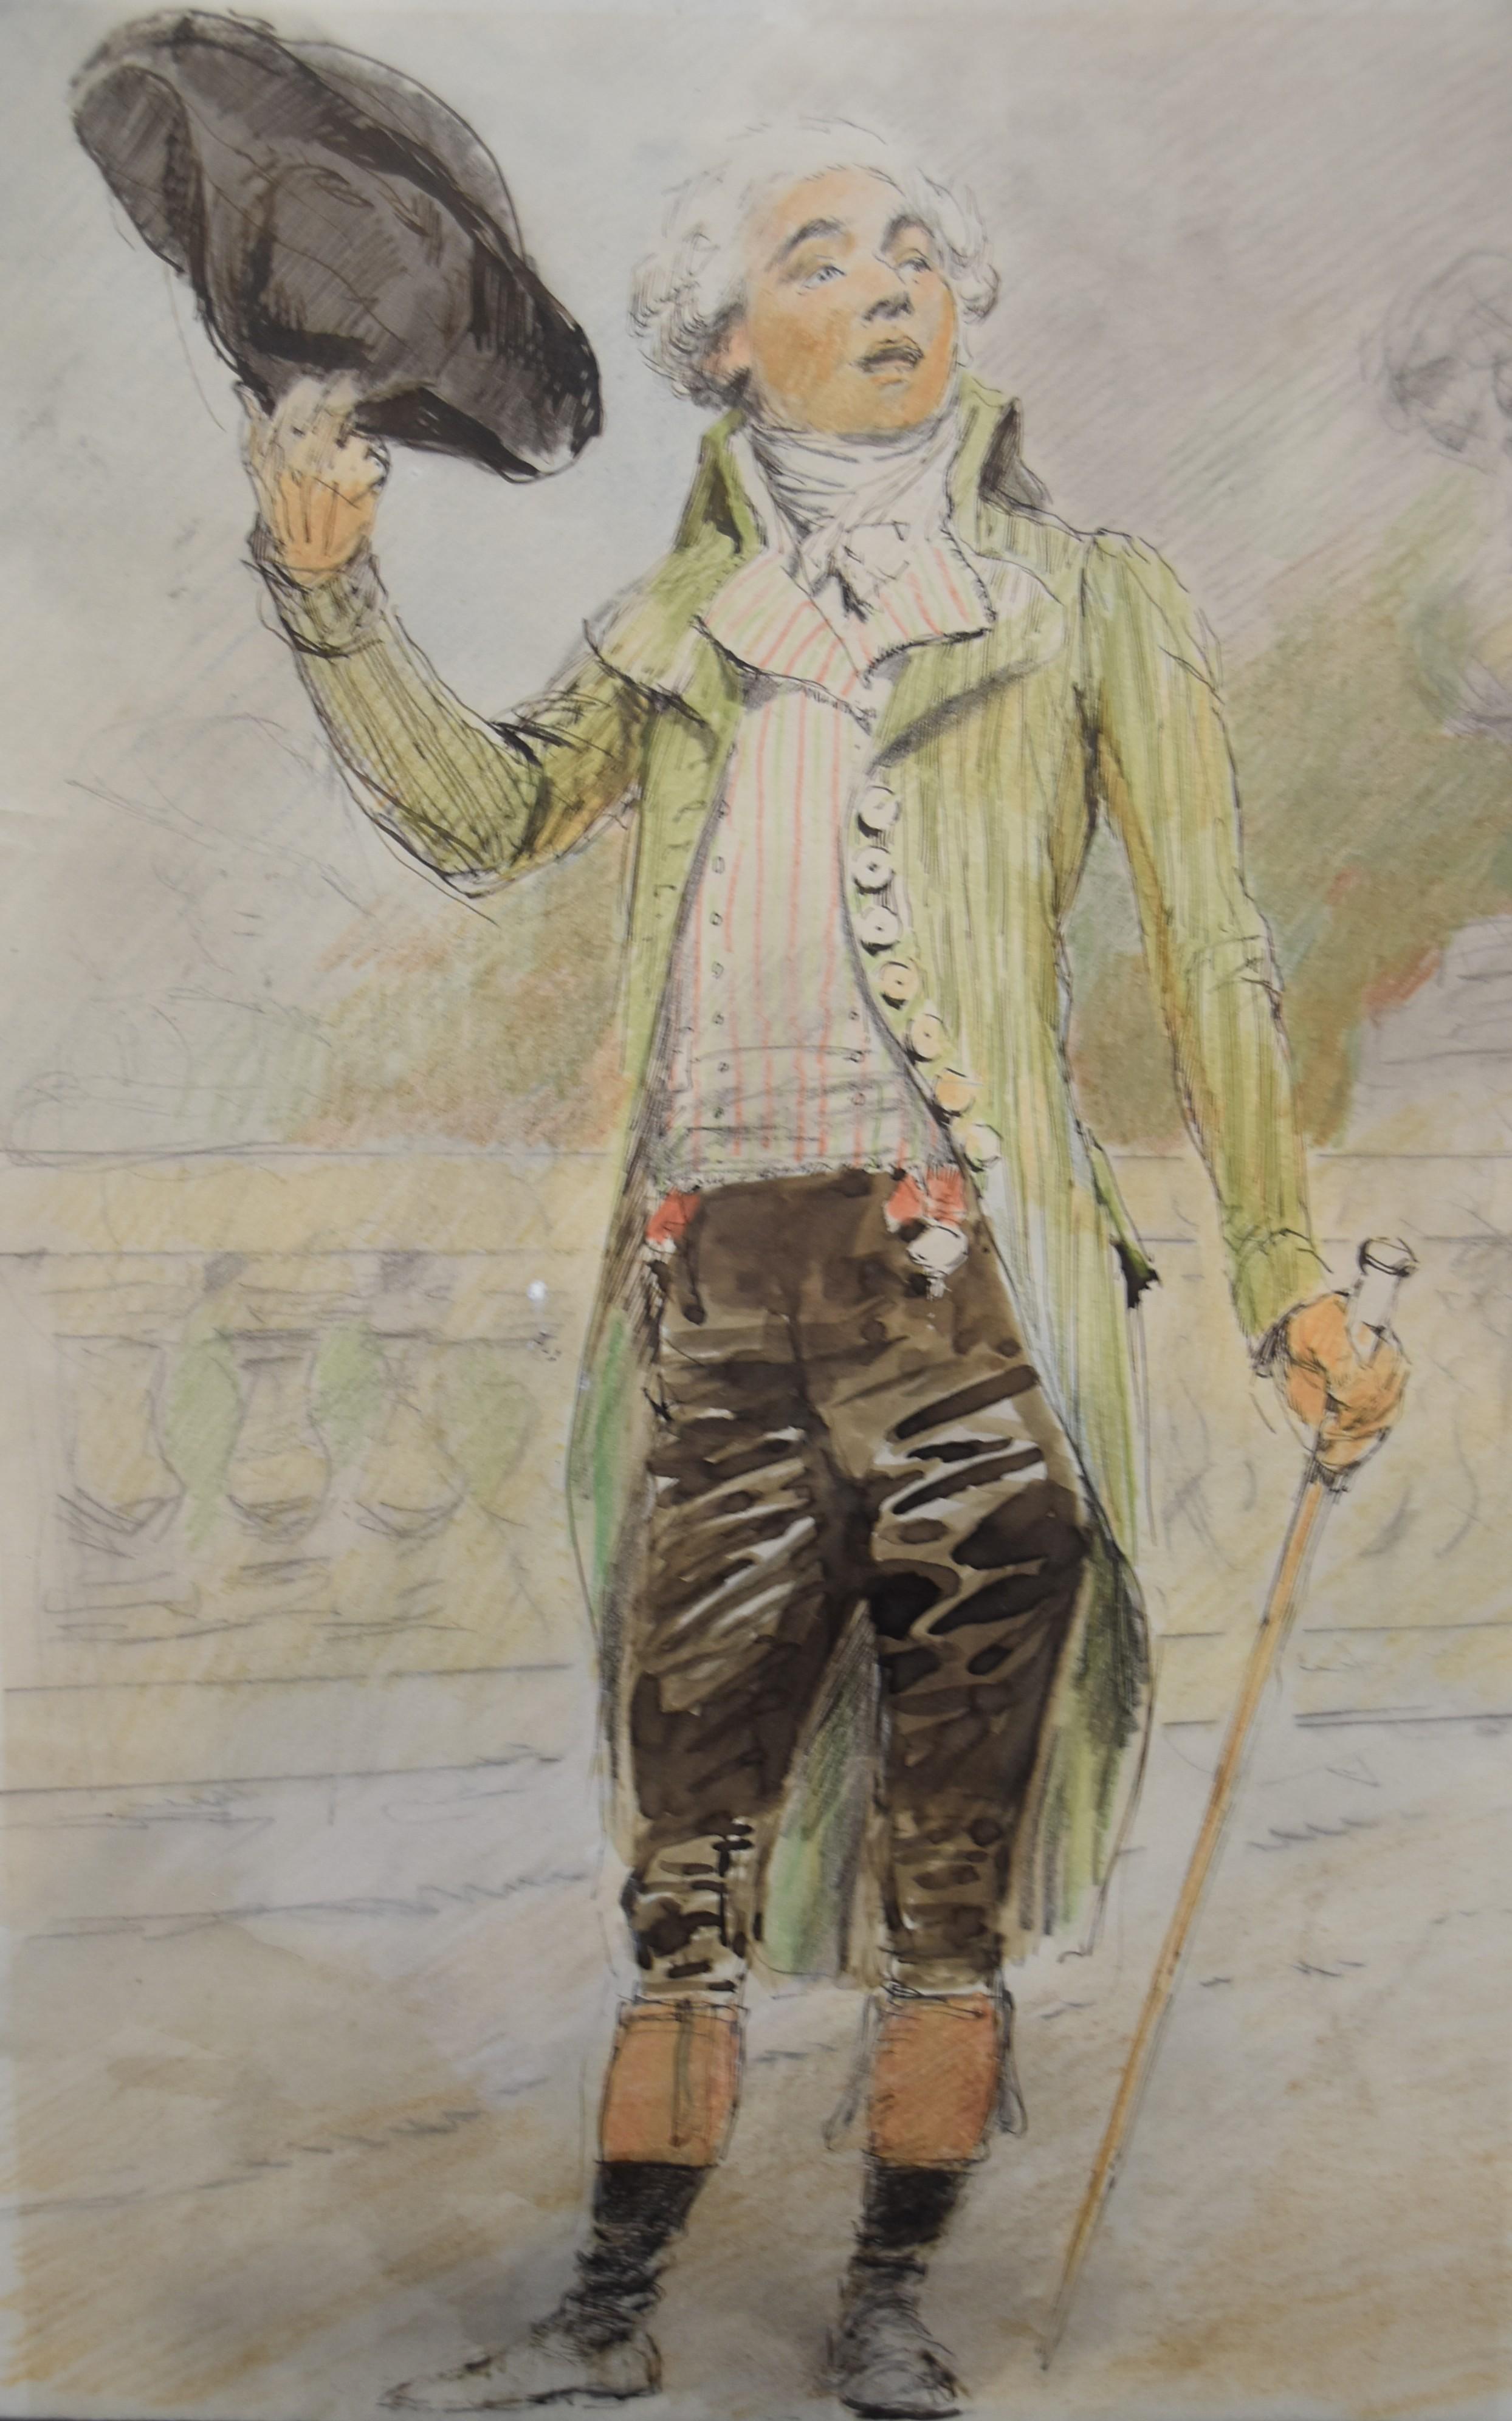 Unknown Portrait - France 19th Century, A young man from the French Revolution era, watercolor